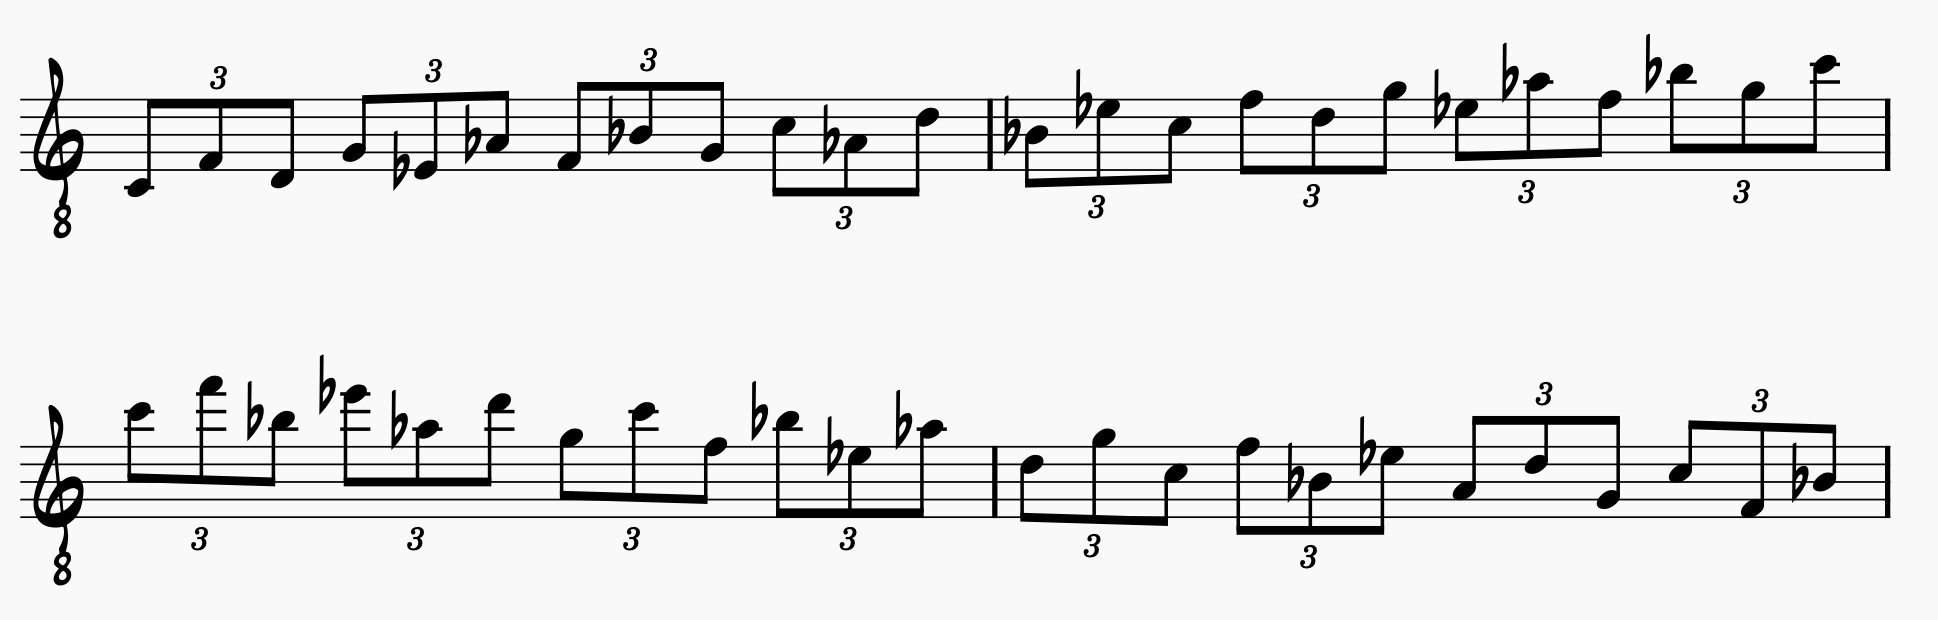 C natural minor in 4ths over a triplet rhythm